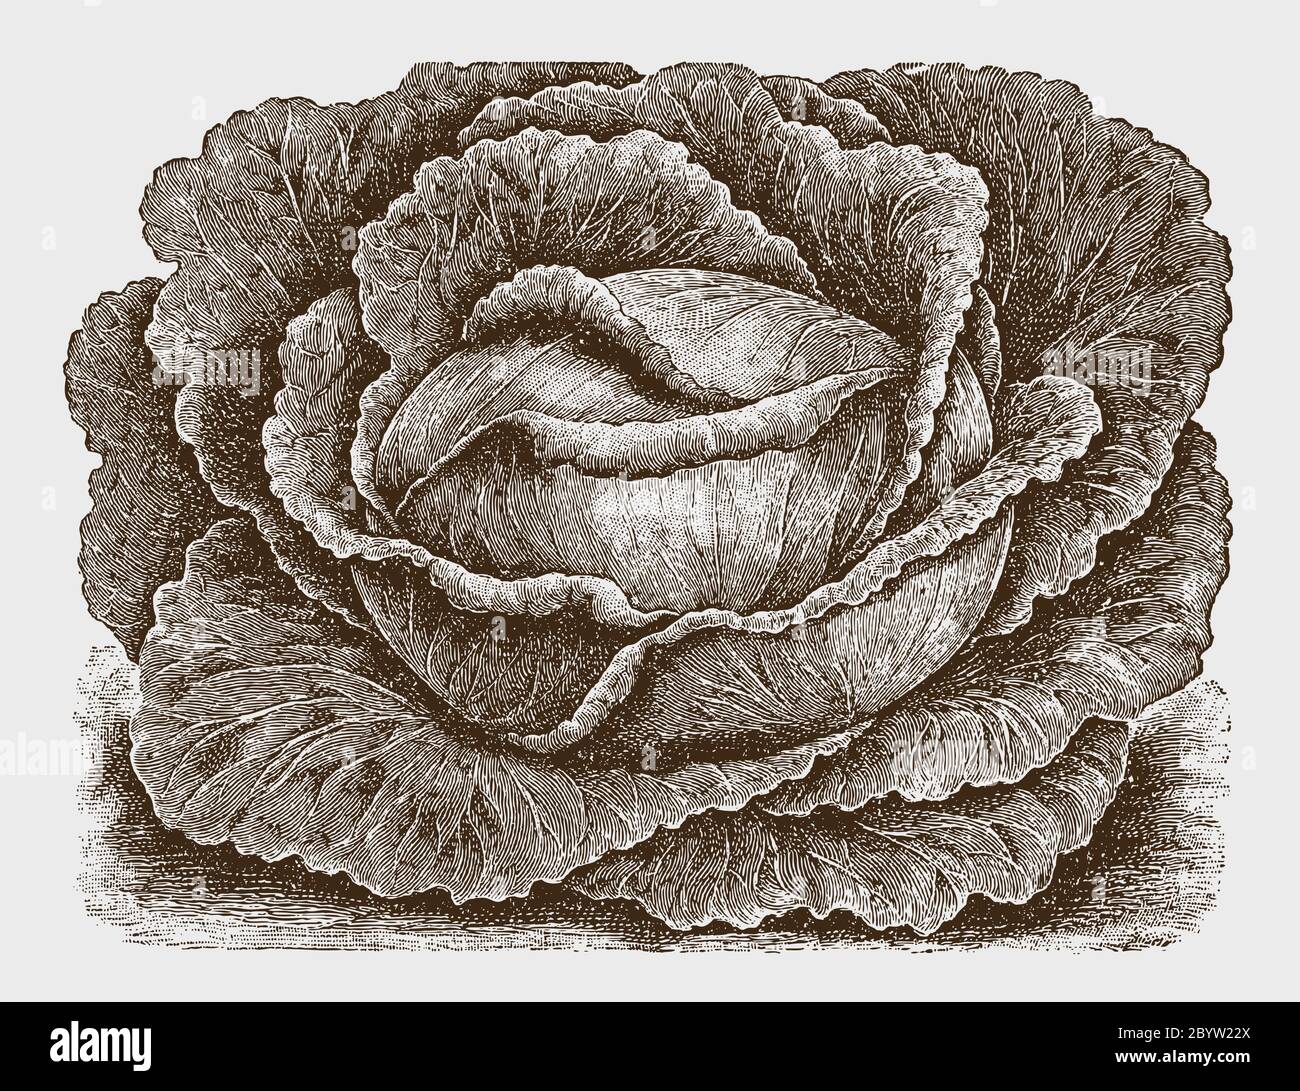 Large flat head cabbage cultivar, after a historical engraving from the early 20th century Stock Vector